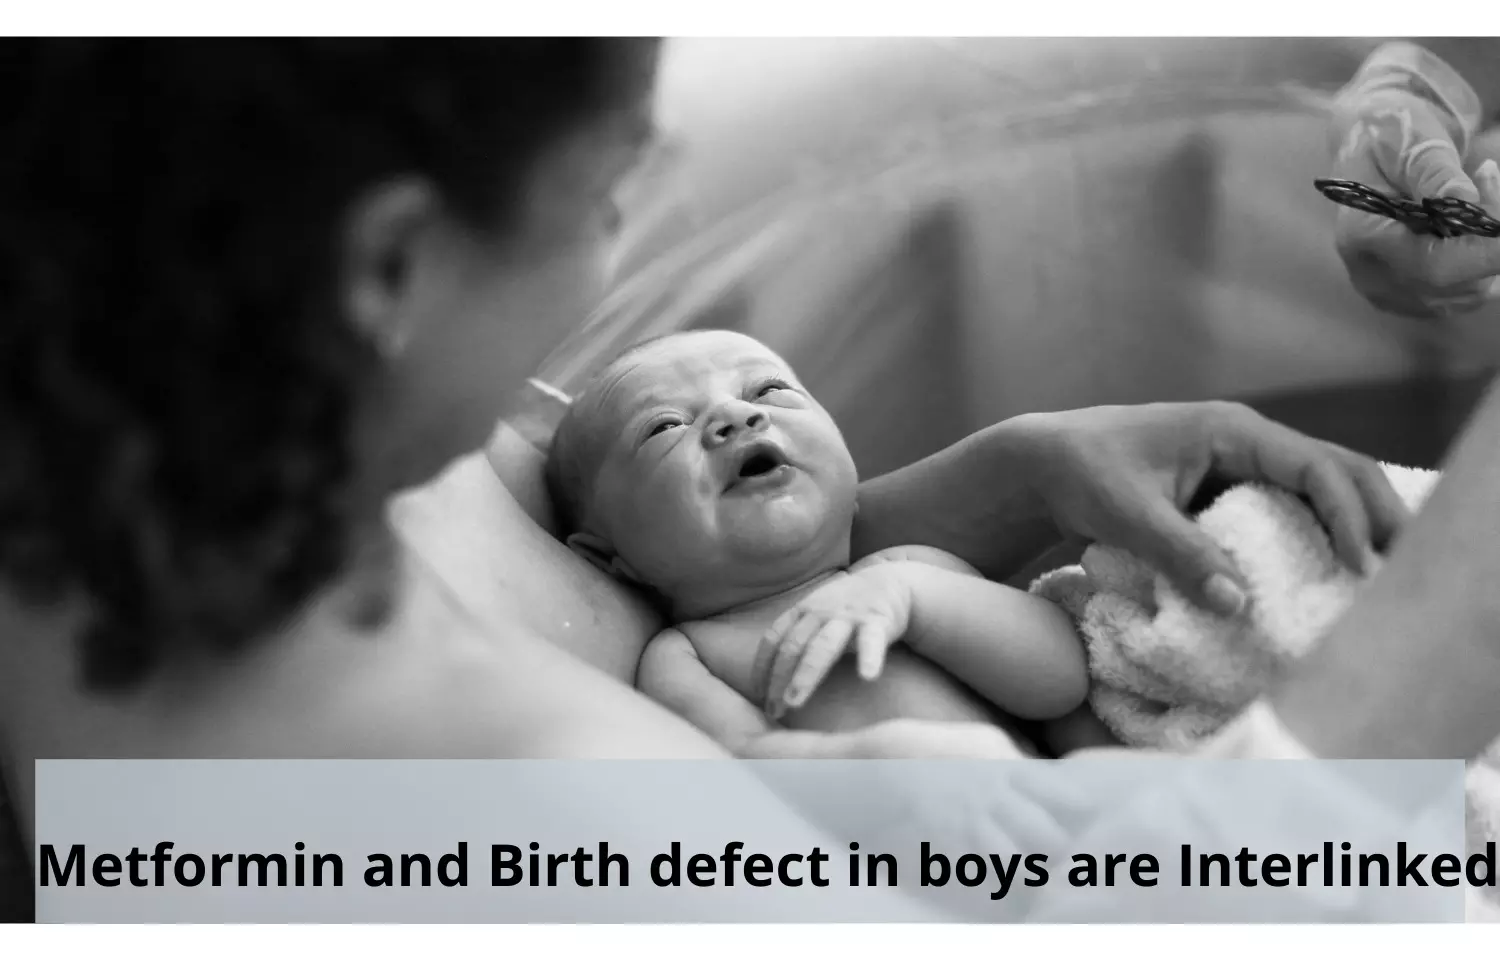 Metformin and Birth defect in boys are Interlinked